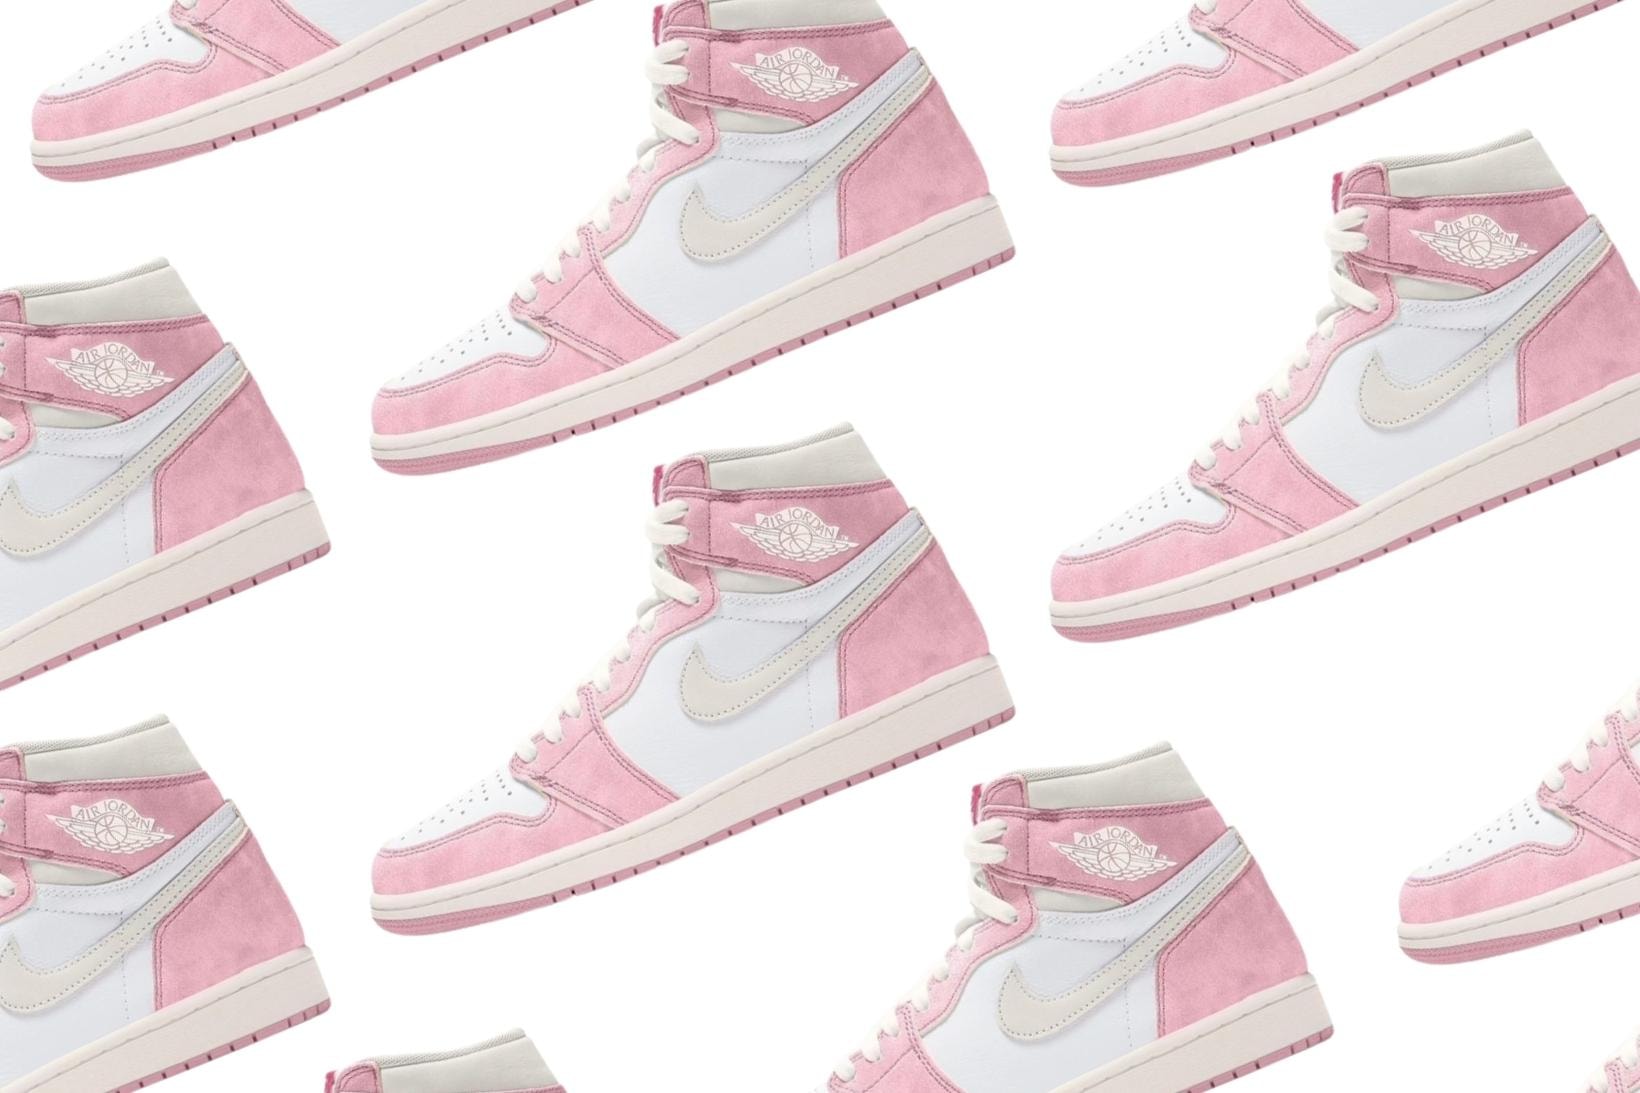 air jordan 1 high womens washed pink D2596-600 price release info first look